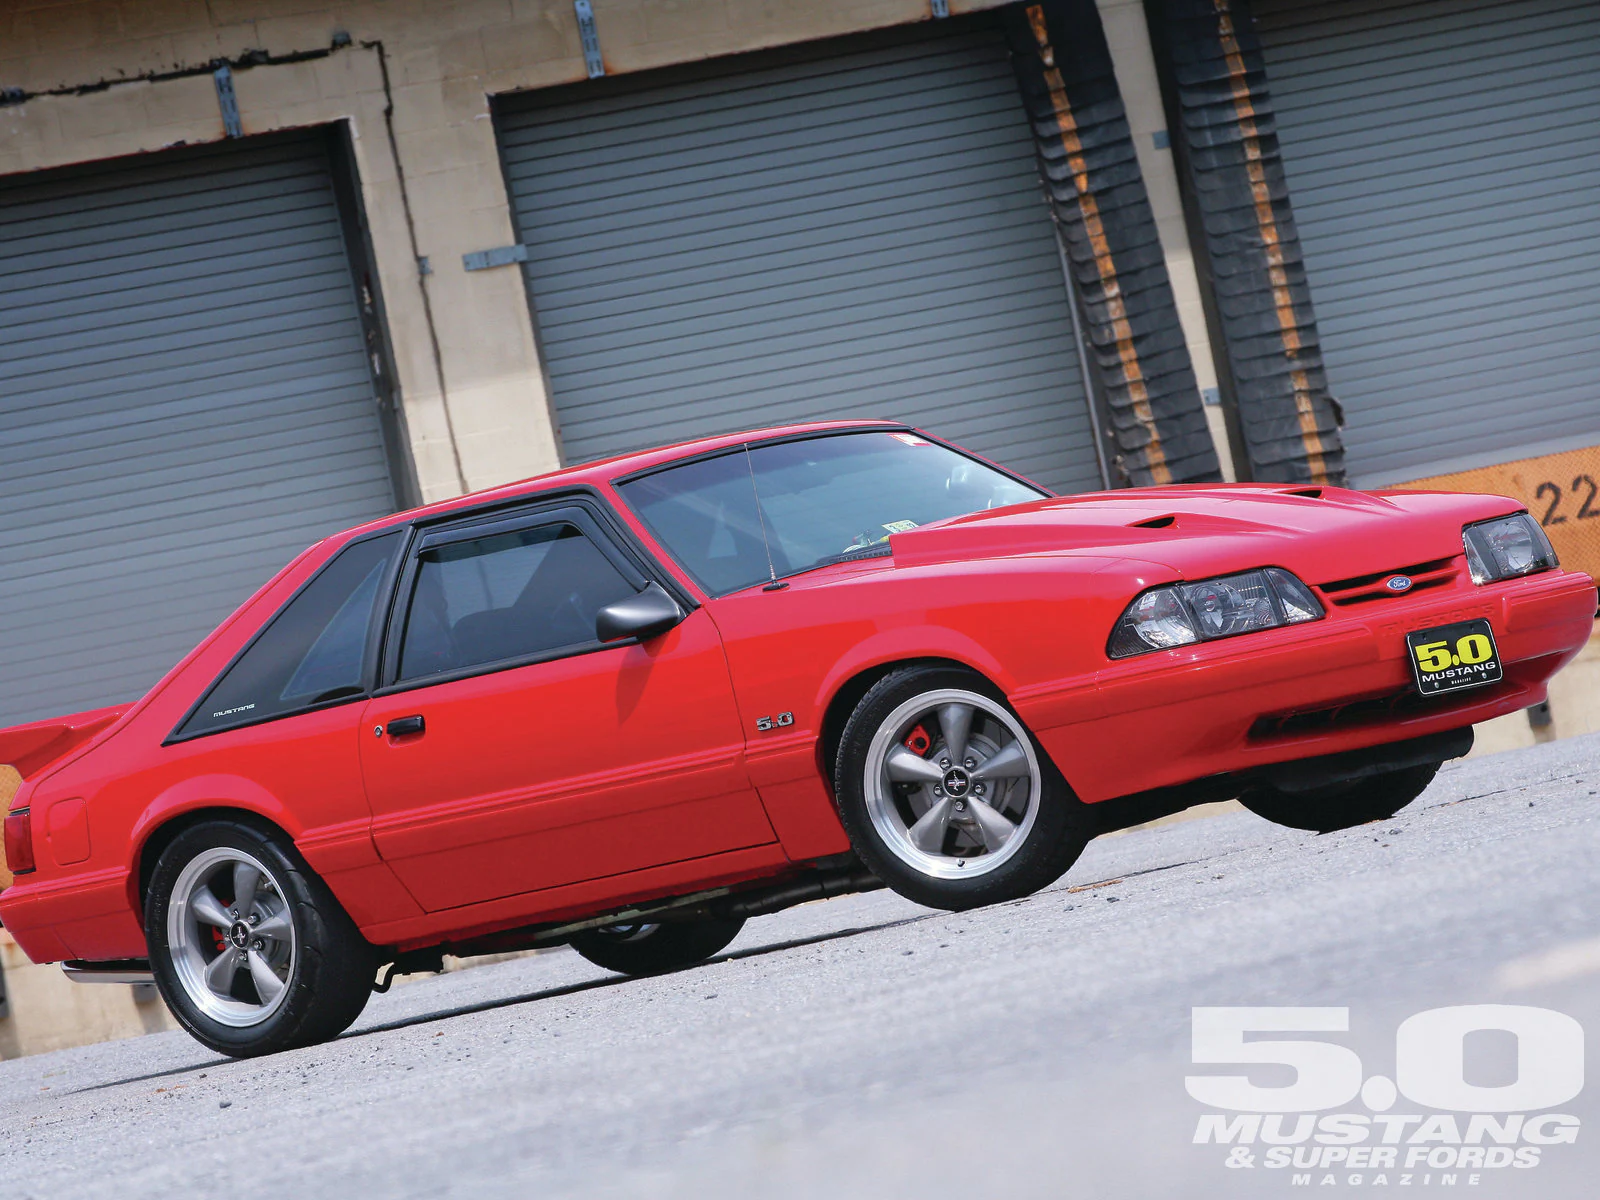 Electric Red 1993 Ford Mustang